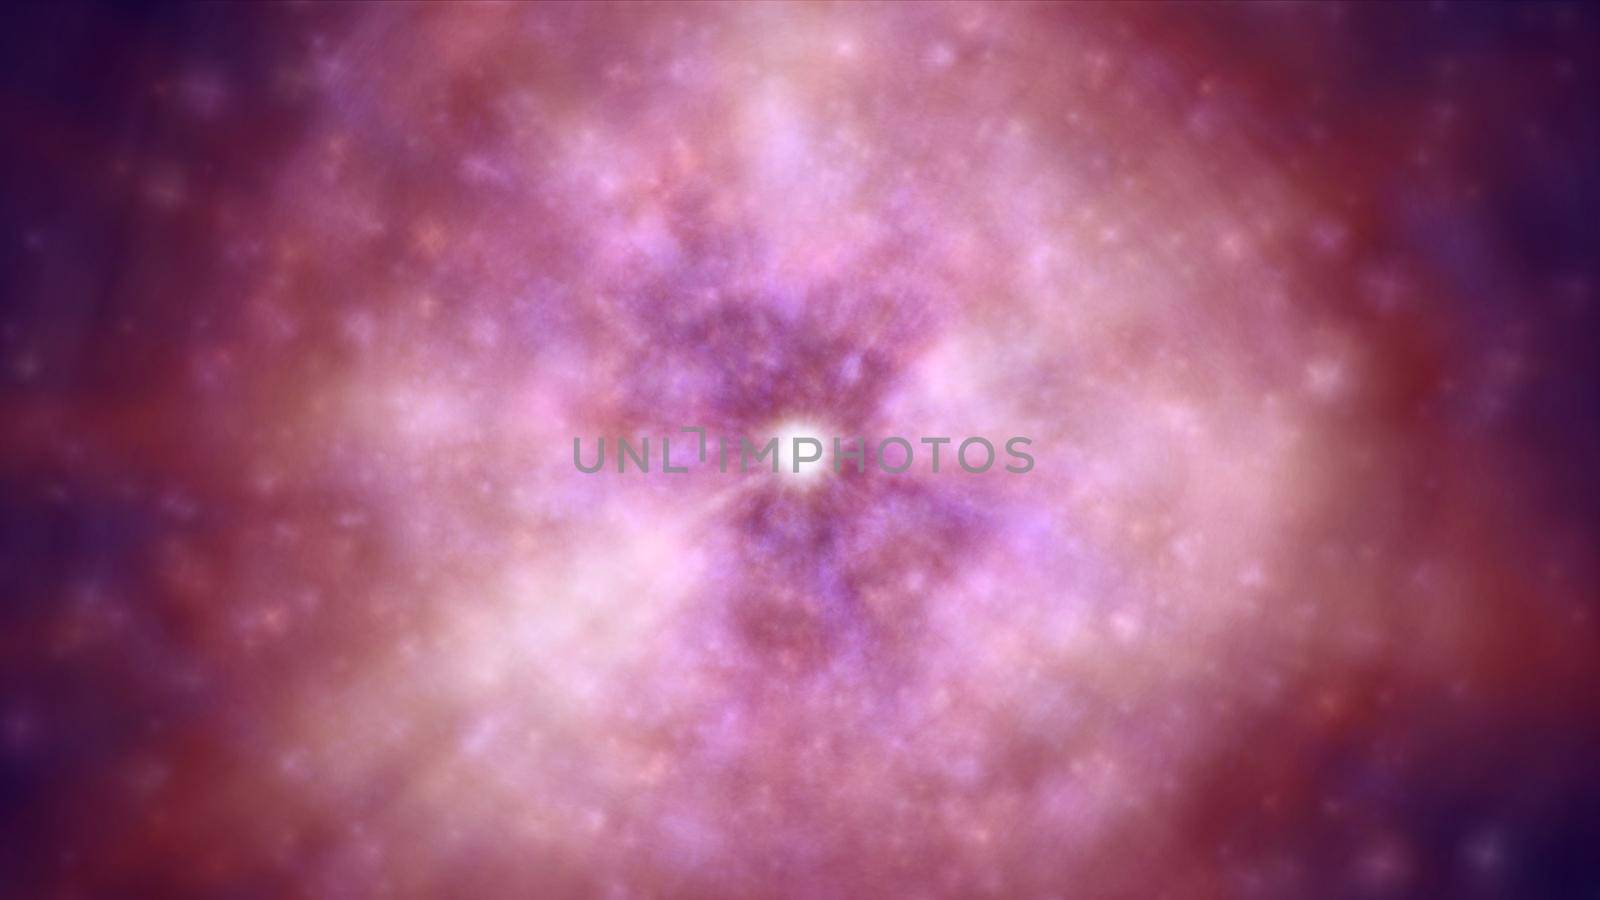 Abstract Zoom Effect Of Star Light Background cosmos illustration